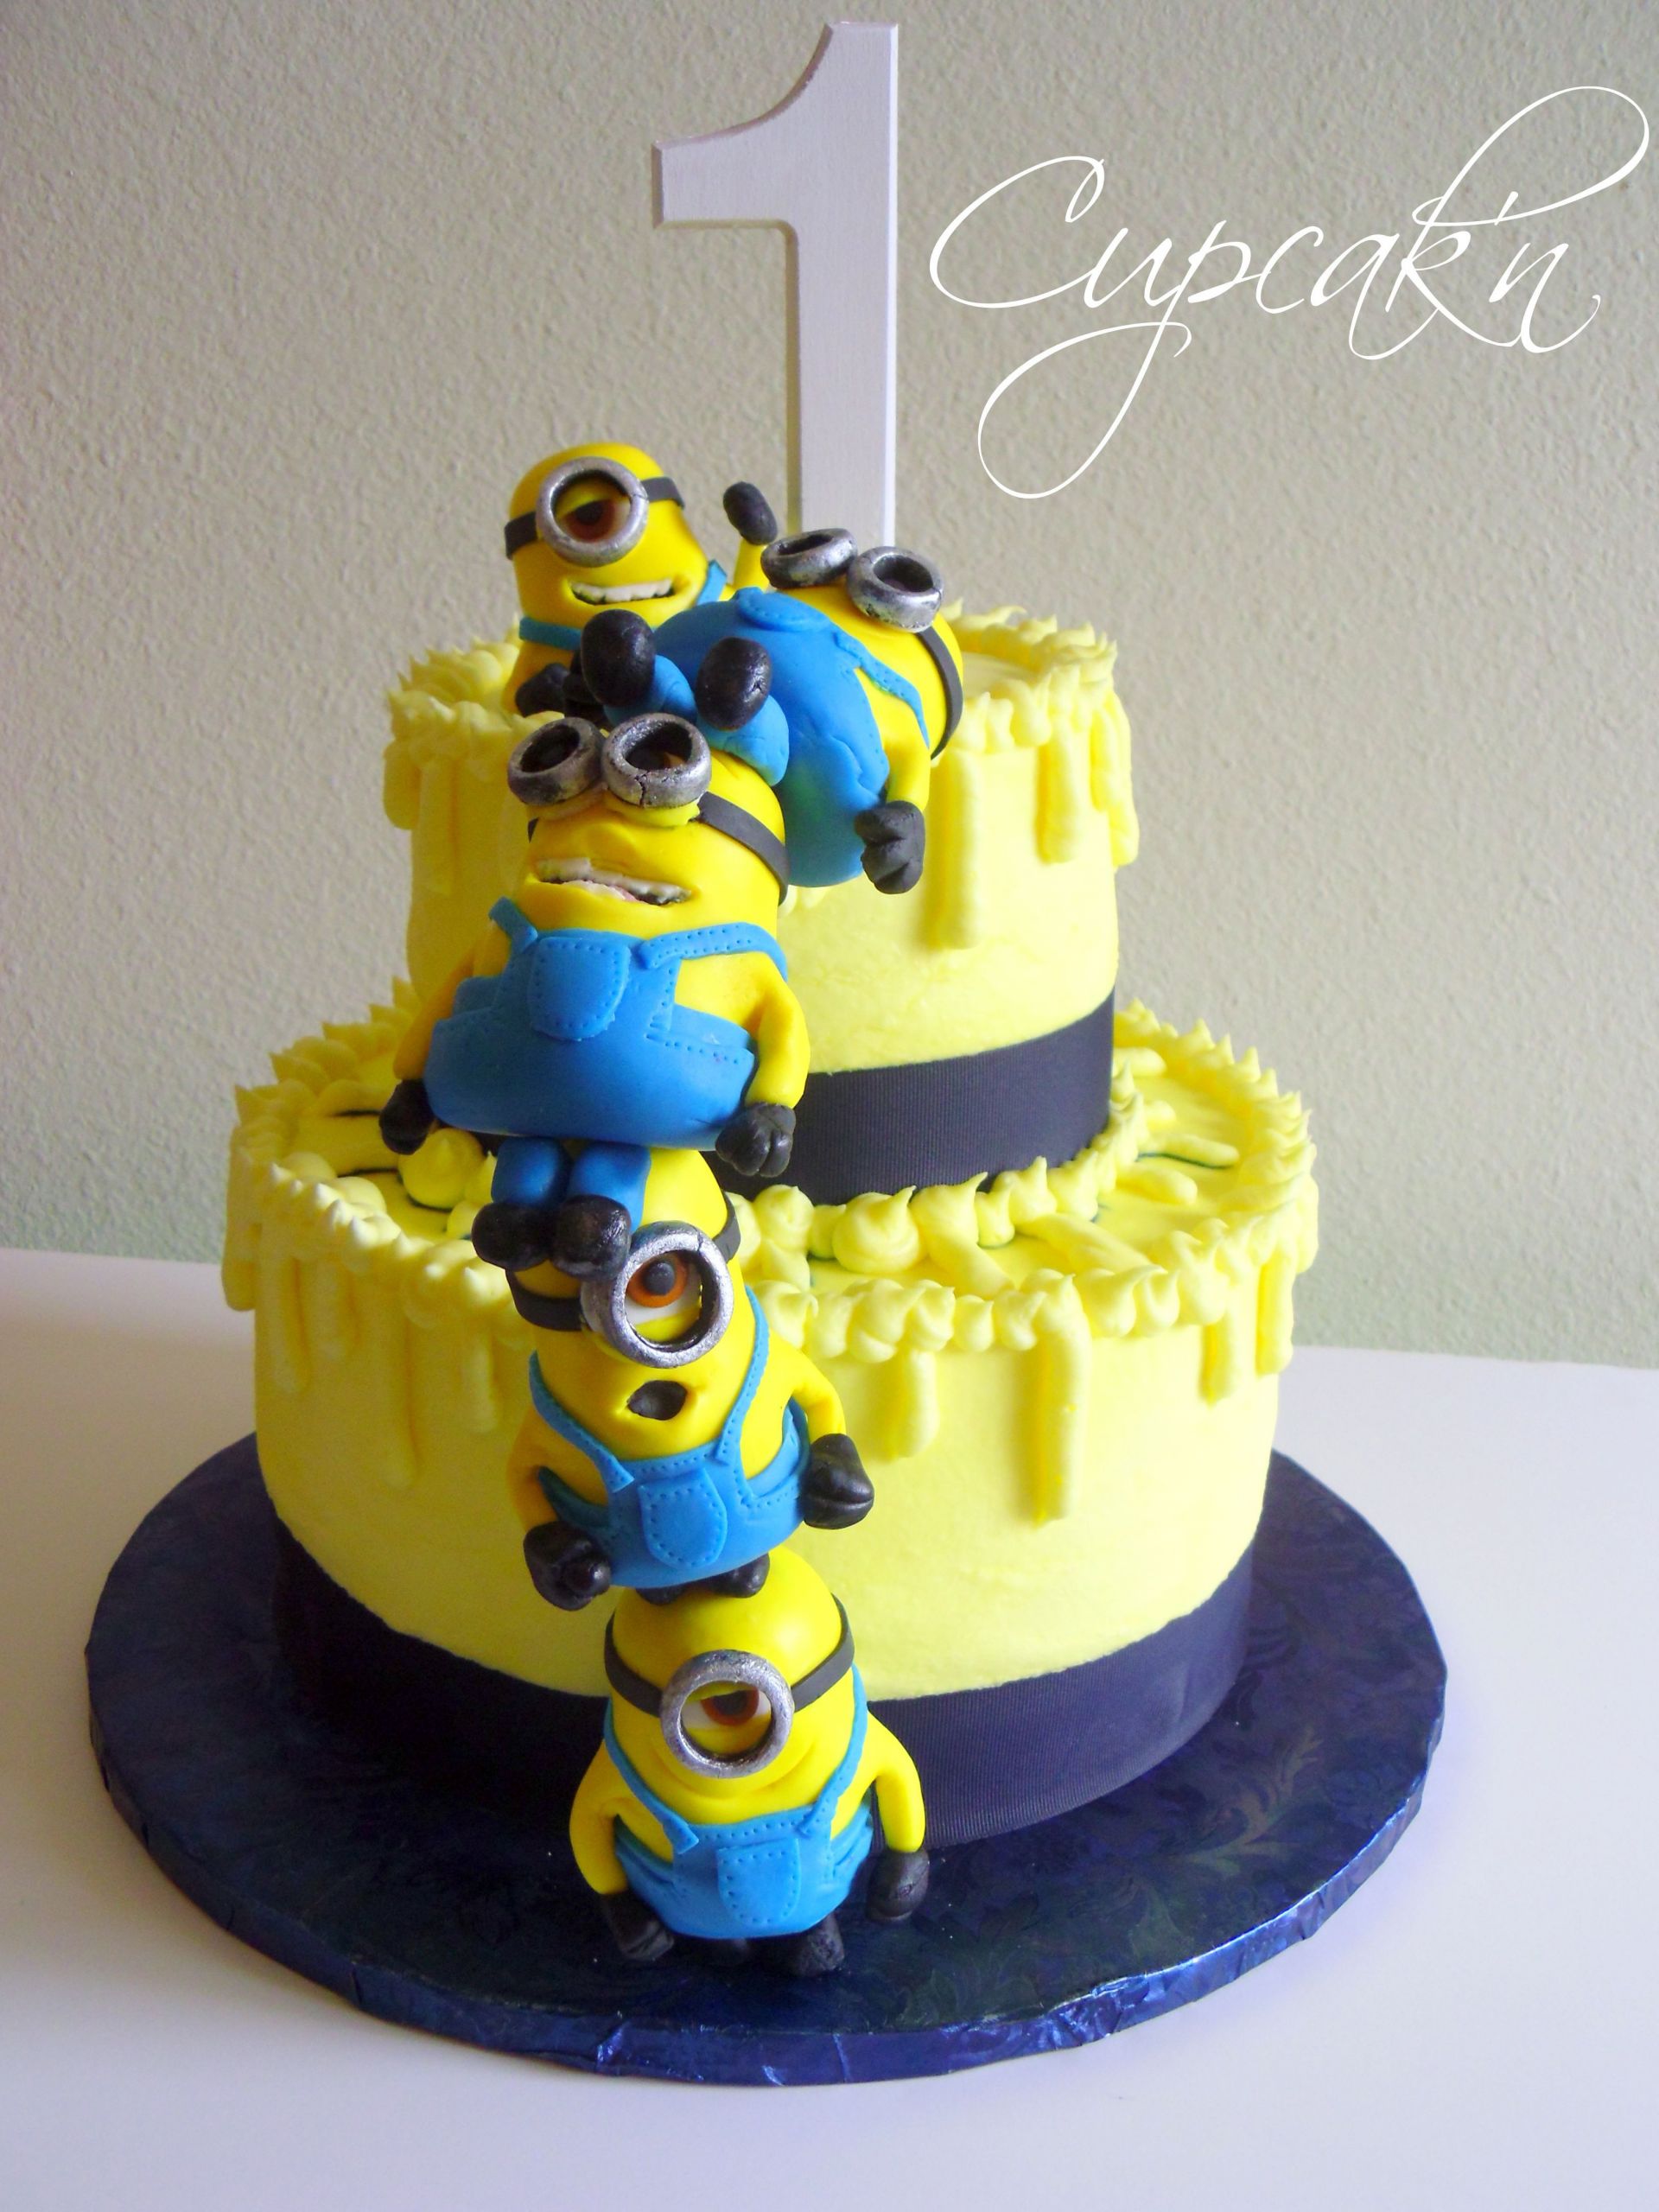 Despicable Me Birthday Cake
 Despicable Me Cake With Stacked Mmf Minions